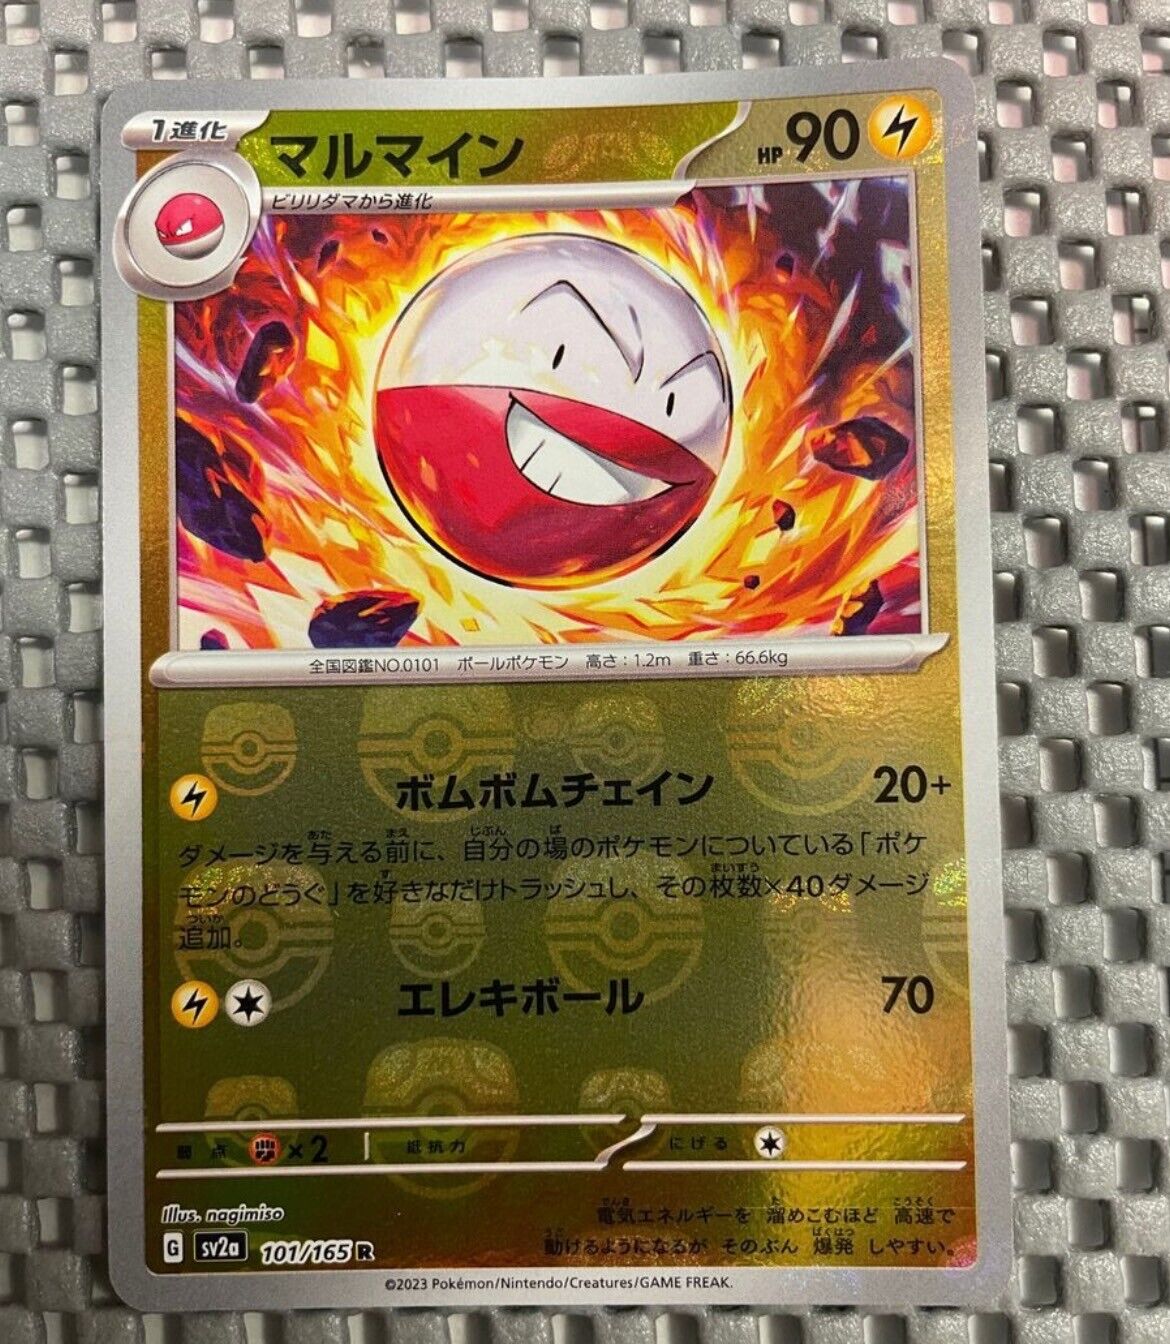 Electrode 101/165 sv2a Master Ball Mirror Pokemon Card 151 FROM JAPAN